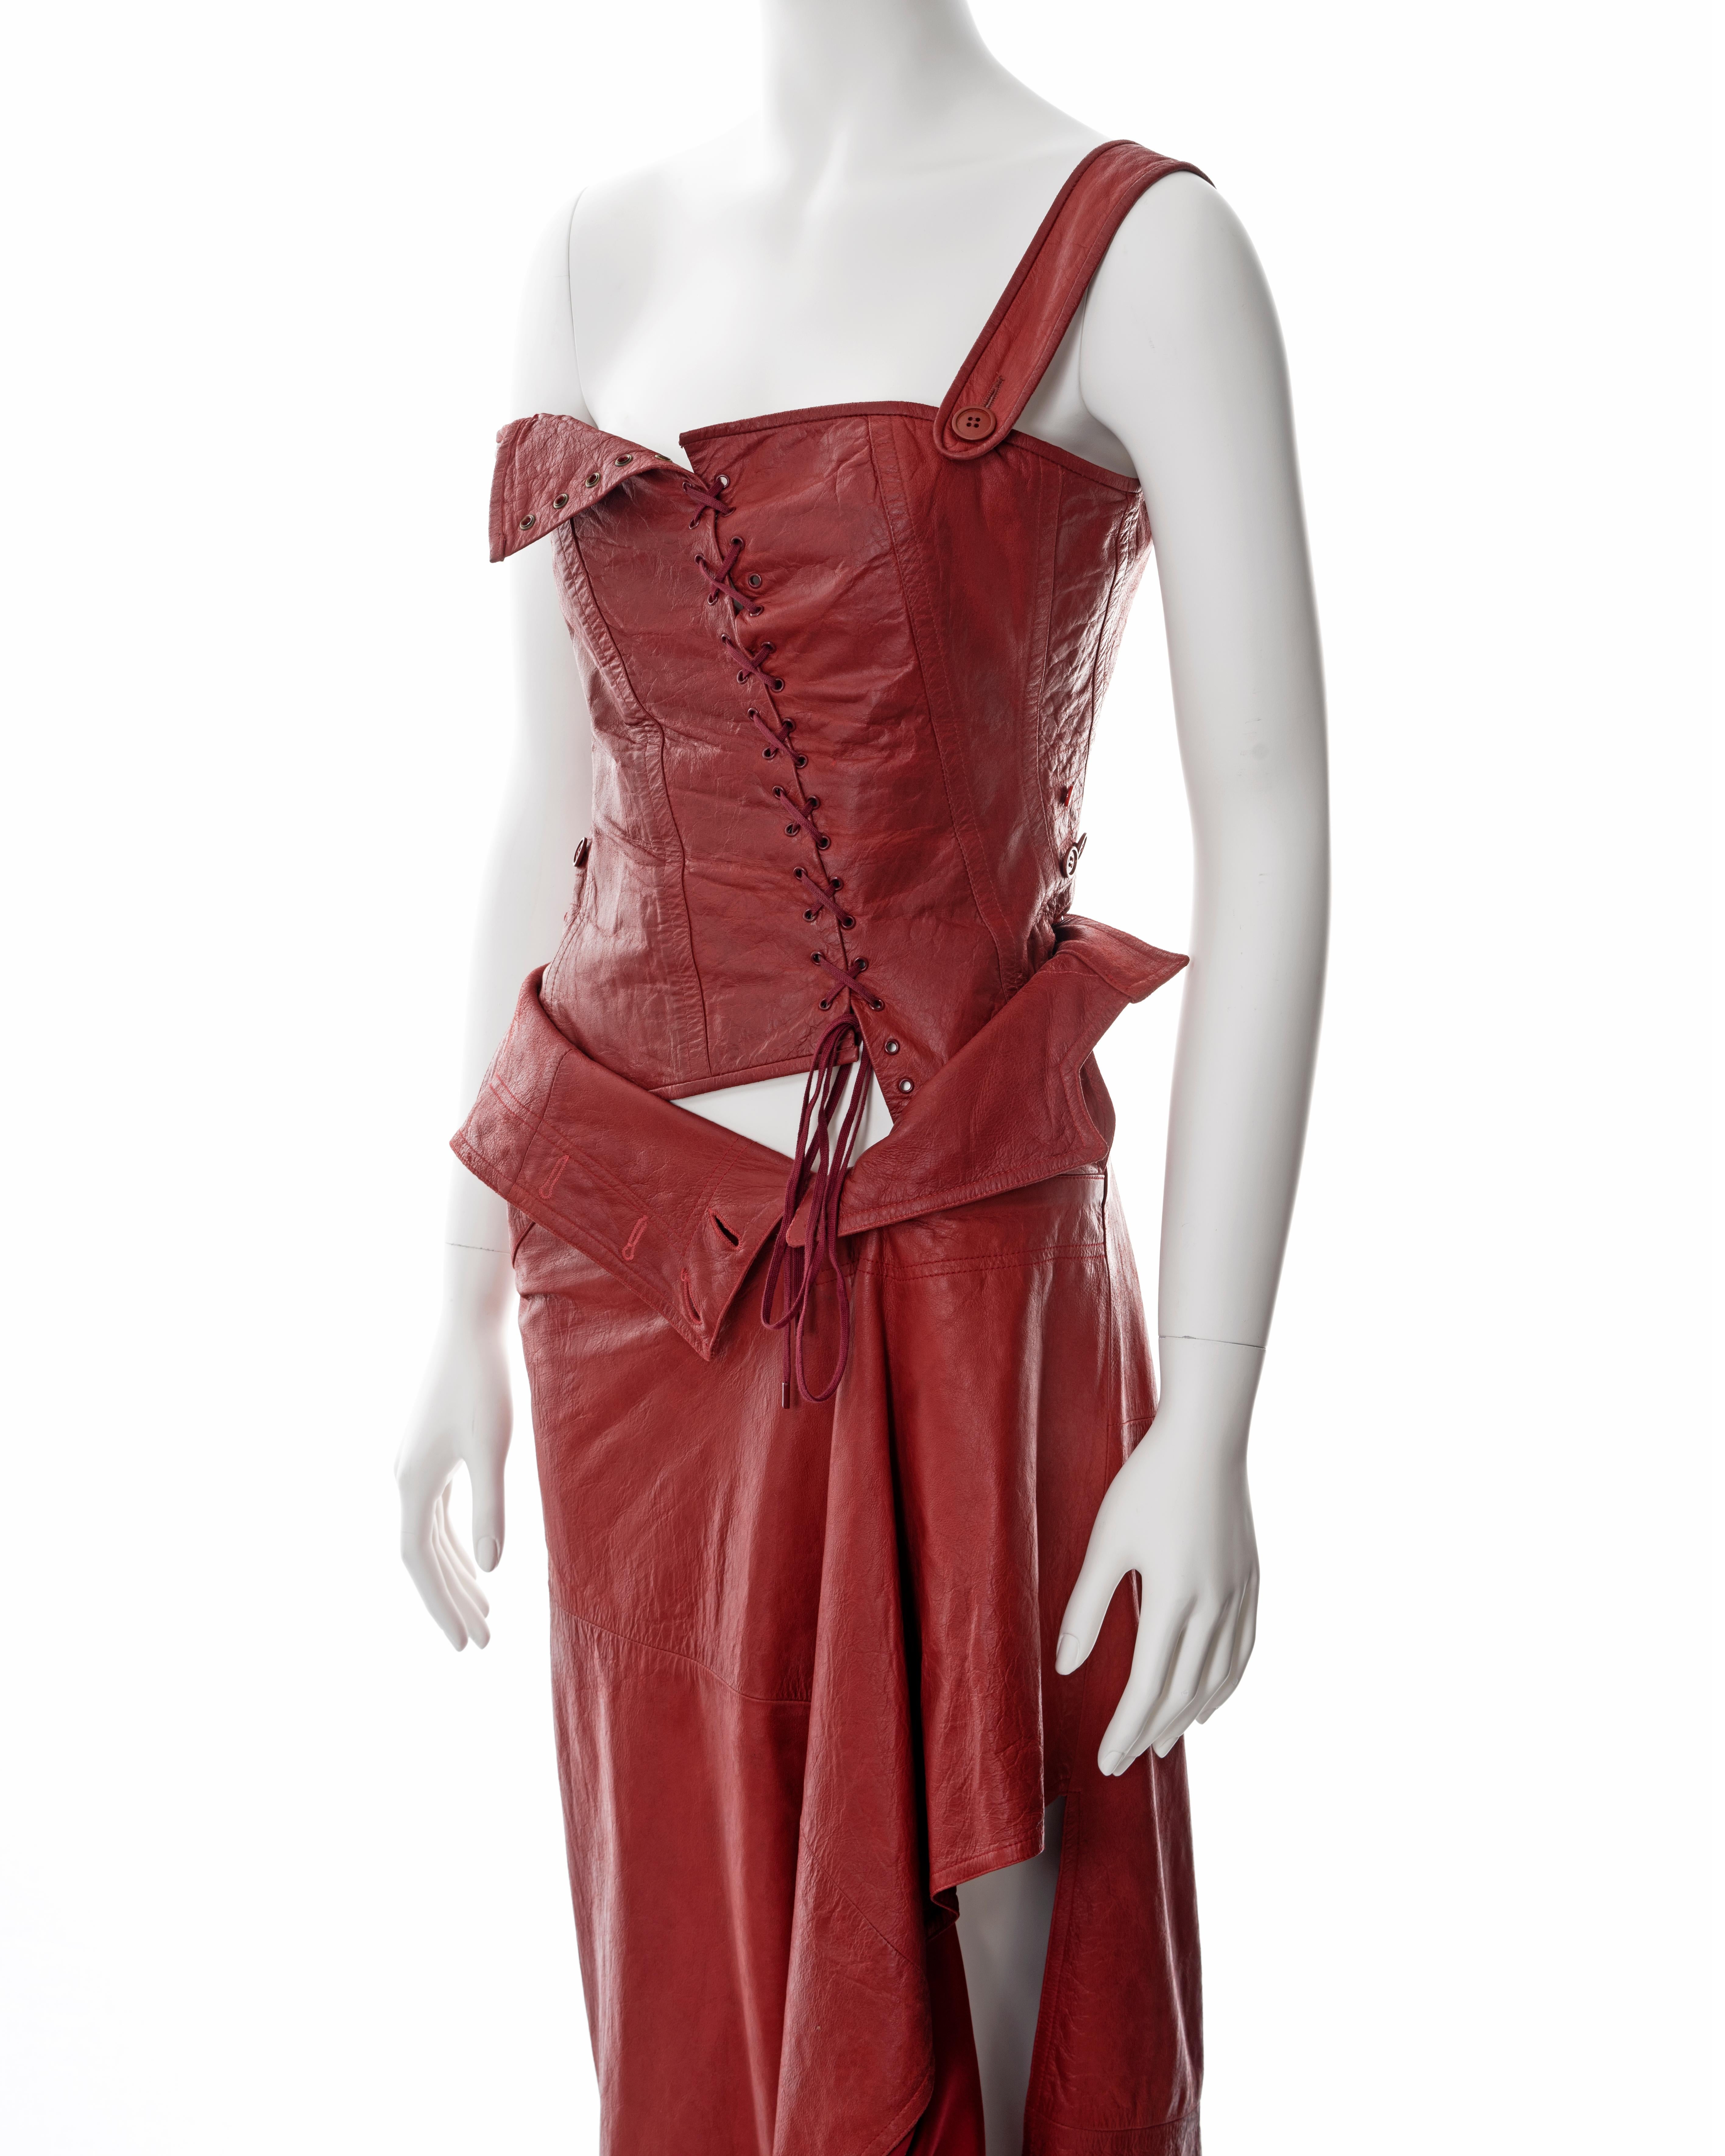 Christian Dior by John Galliano red lambskin leather corset and skirt, ss 2000 3